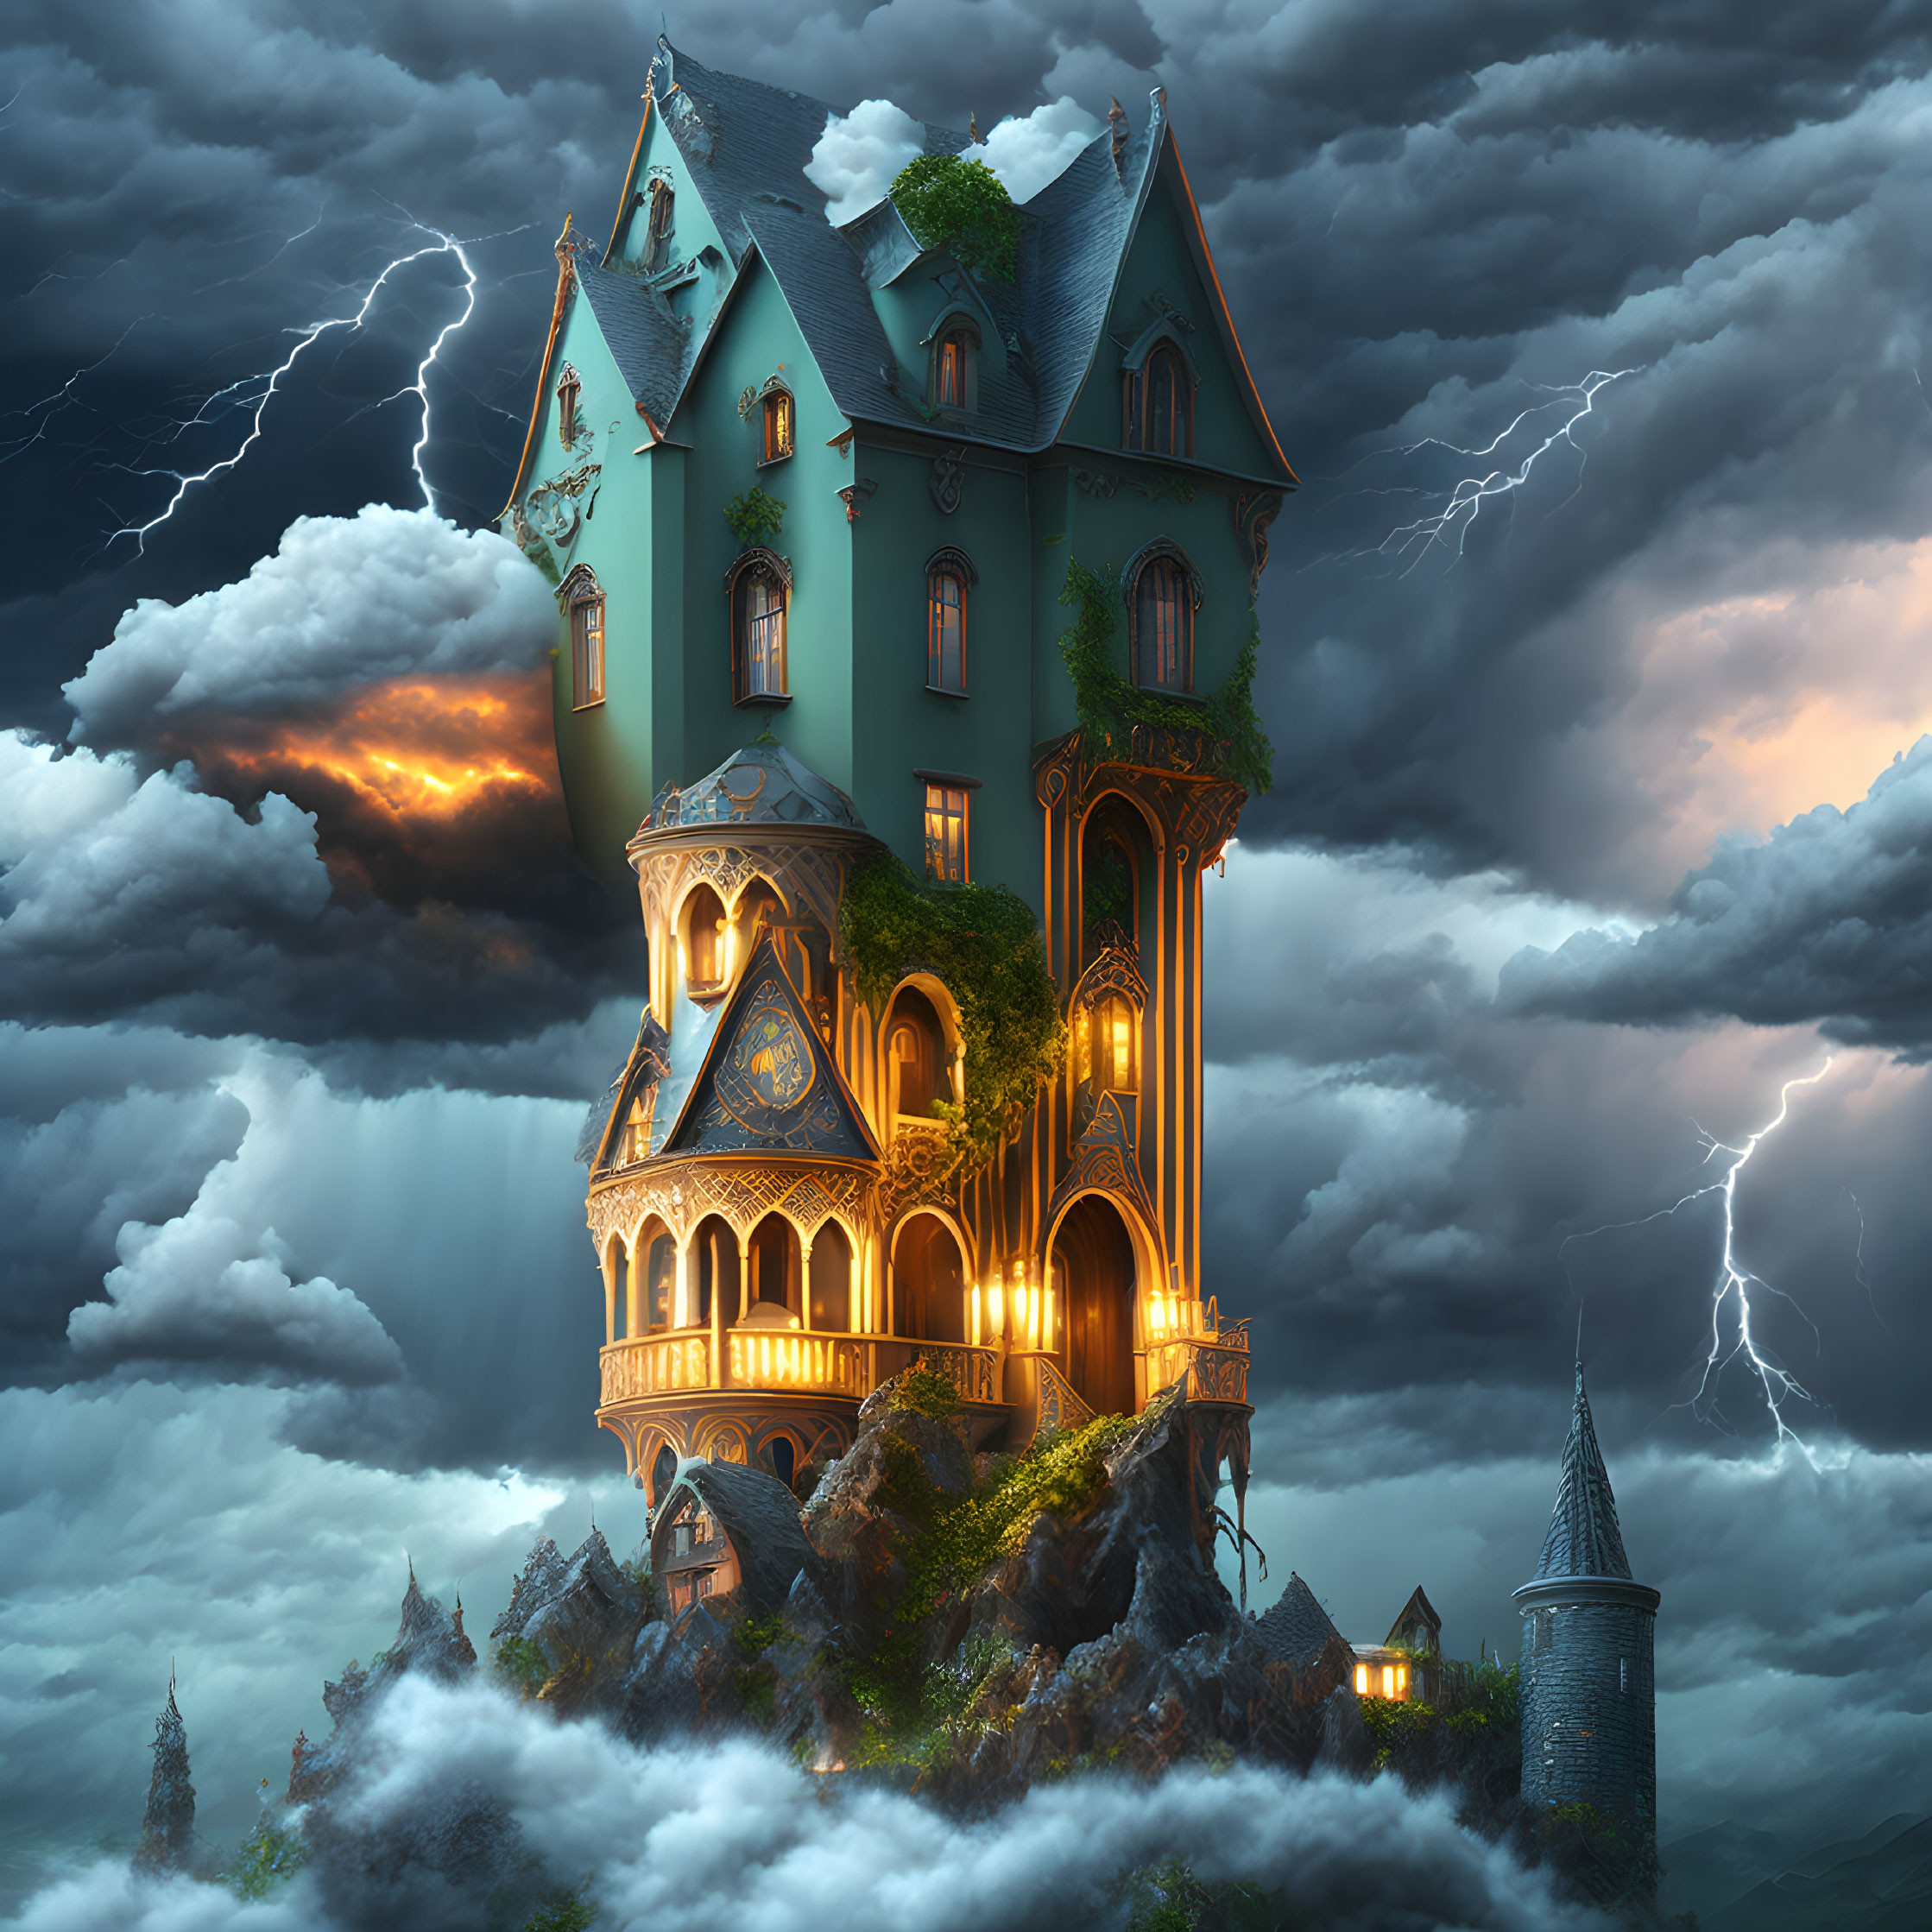 House in the Clouds